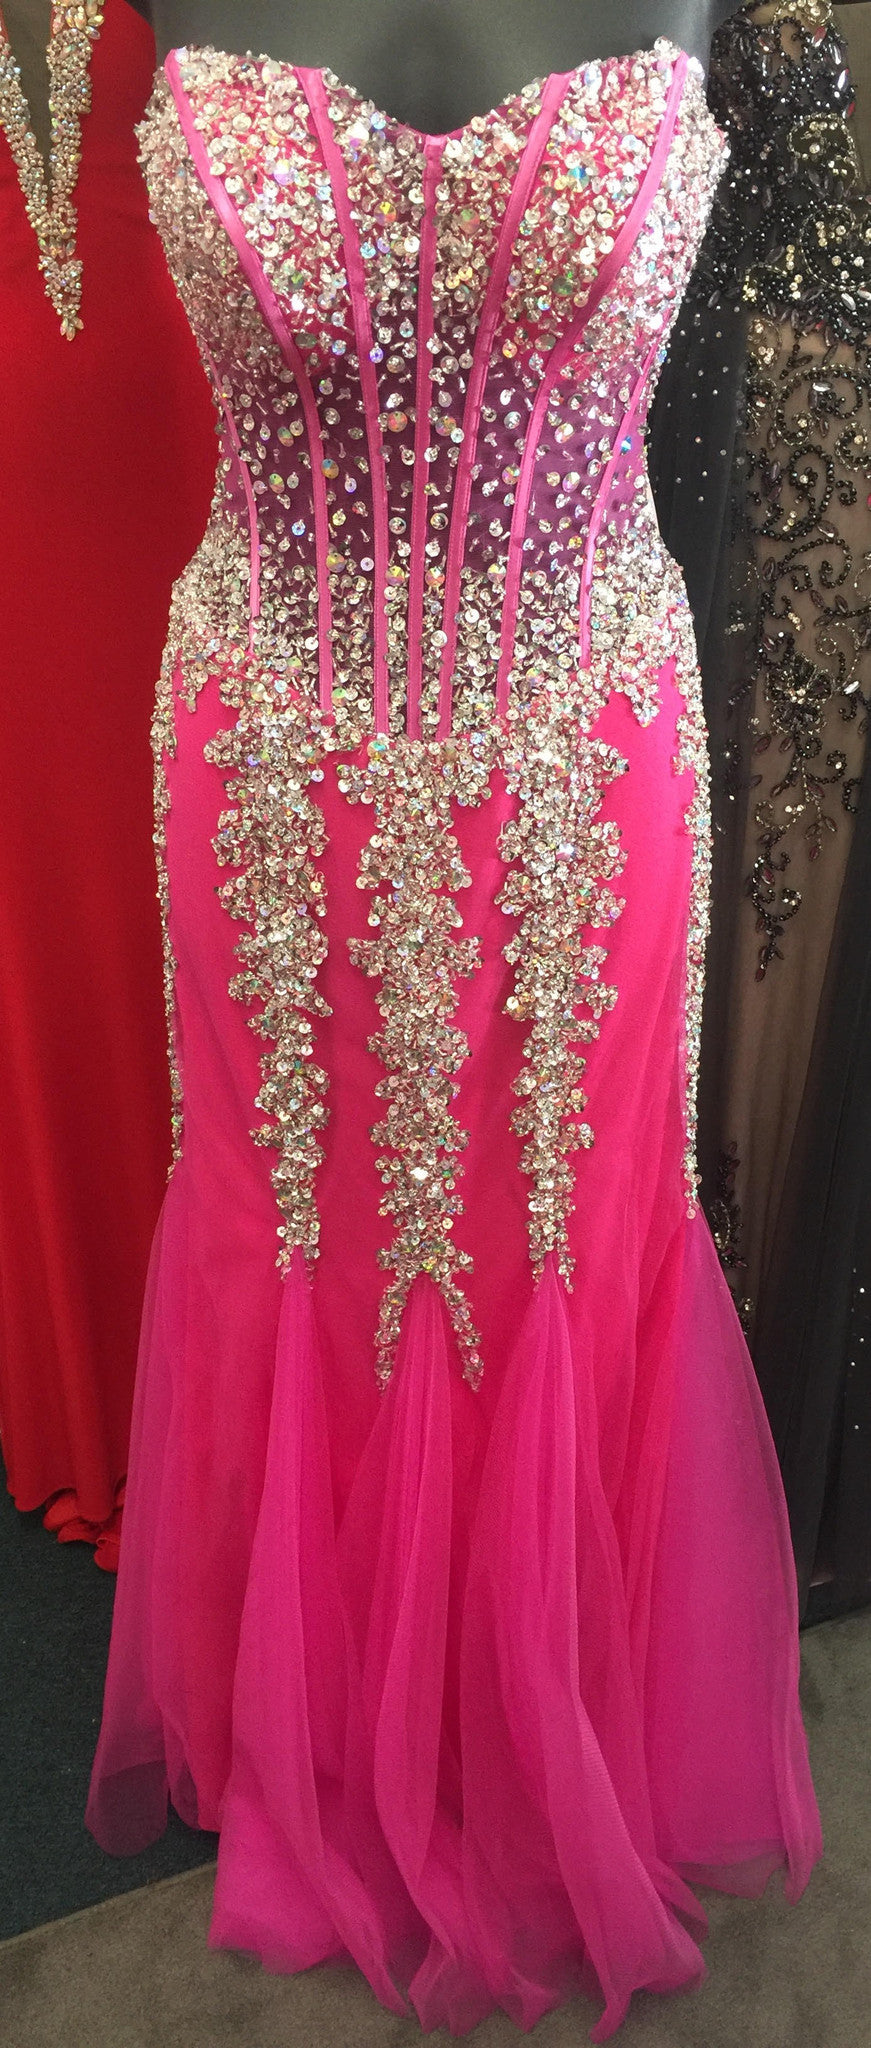 Jovani 5908 Stunning strapless mermaid prom dress features a sweetheart neckline and crystal embellished bodice. Evening gown pageant dress formal dress   Hot Pink /Silver size 2 